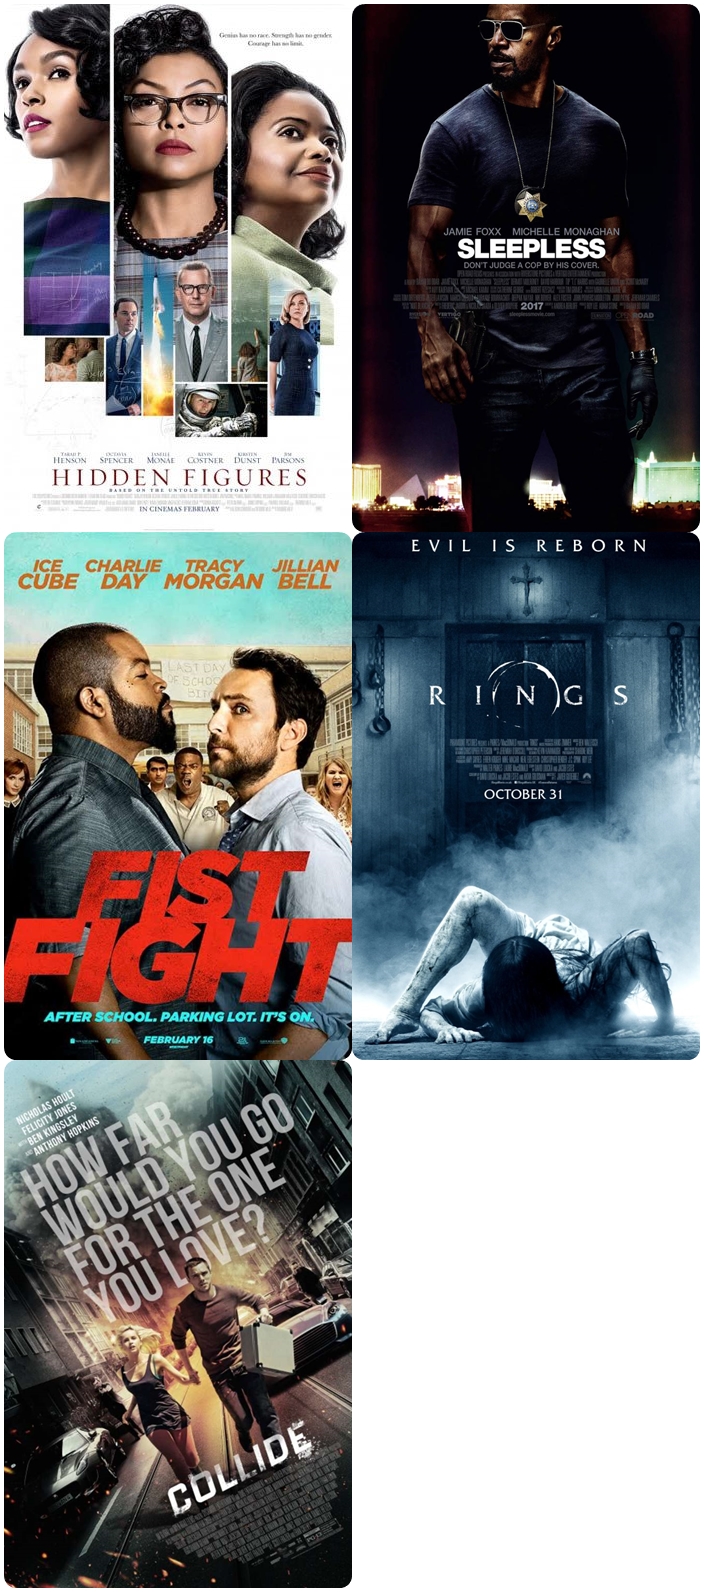 Top 5 Movies You Need To Catch This Week